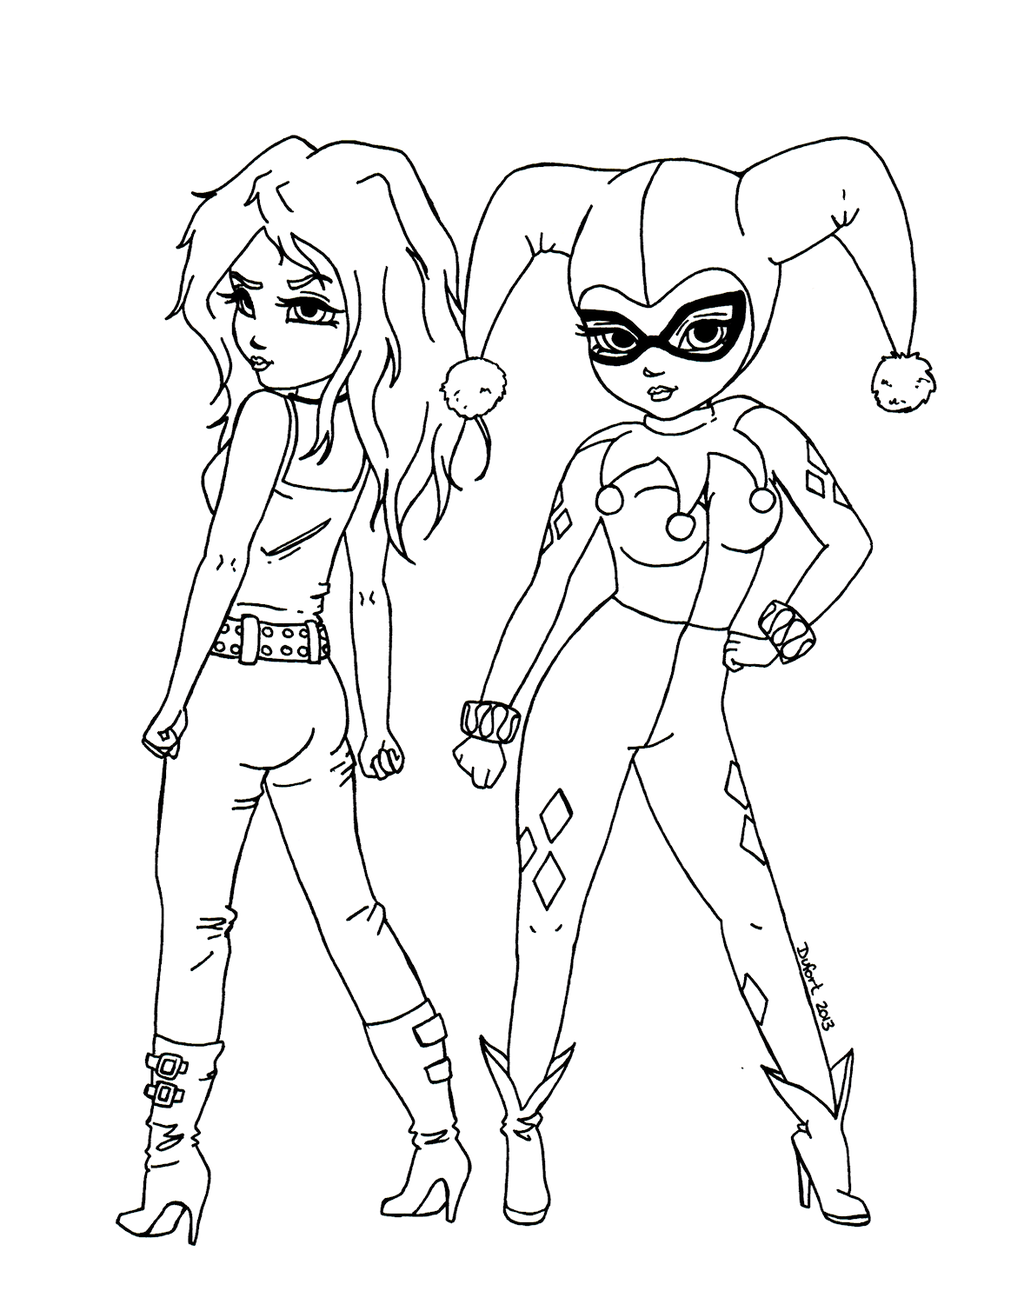 Harley Quinn Coloring Pages - Printable Harley Quinn Coloring Page